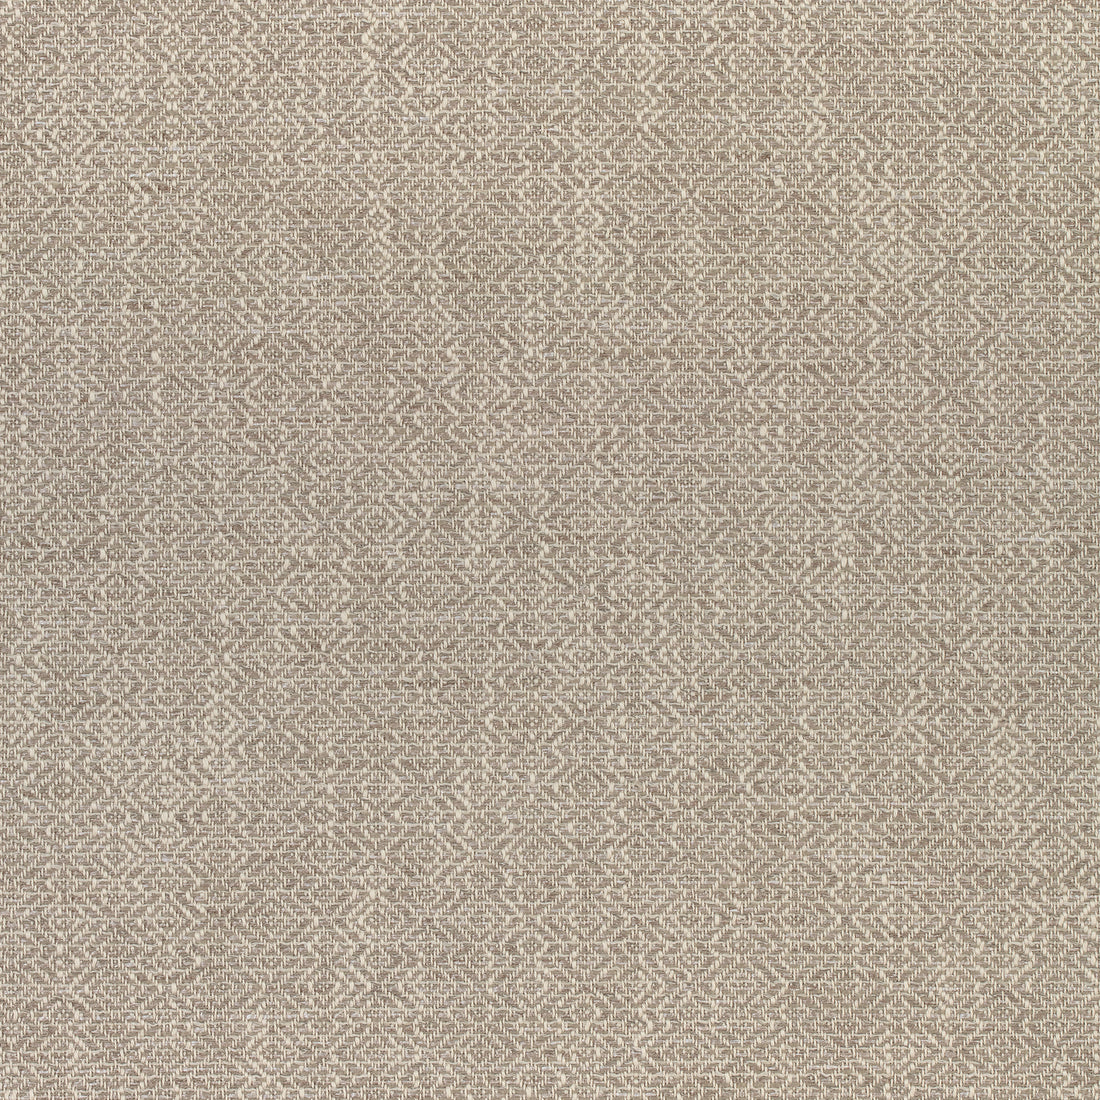 Kingsley fabric in stone color - pattern number W74065 - by Thibaut in the Cadence collection